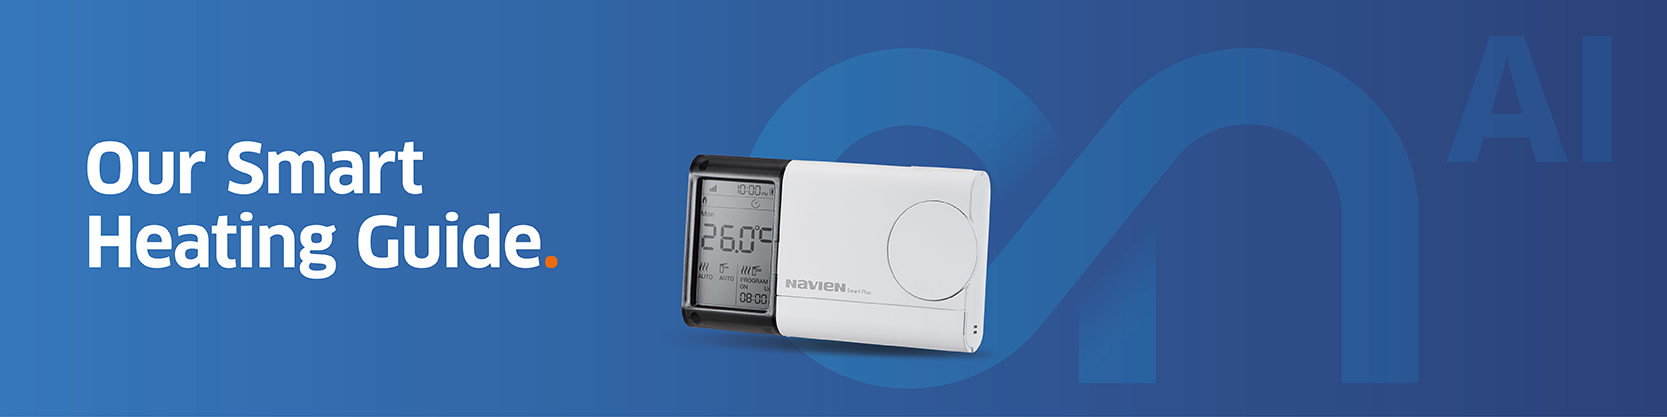 Smart Heating Guide banner